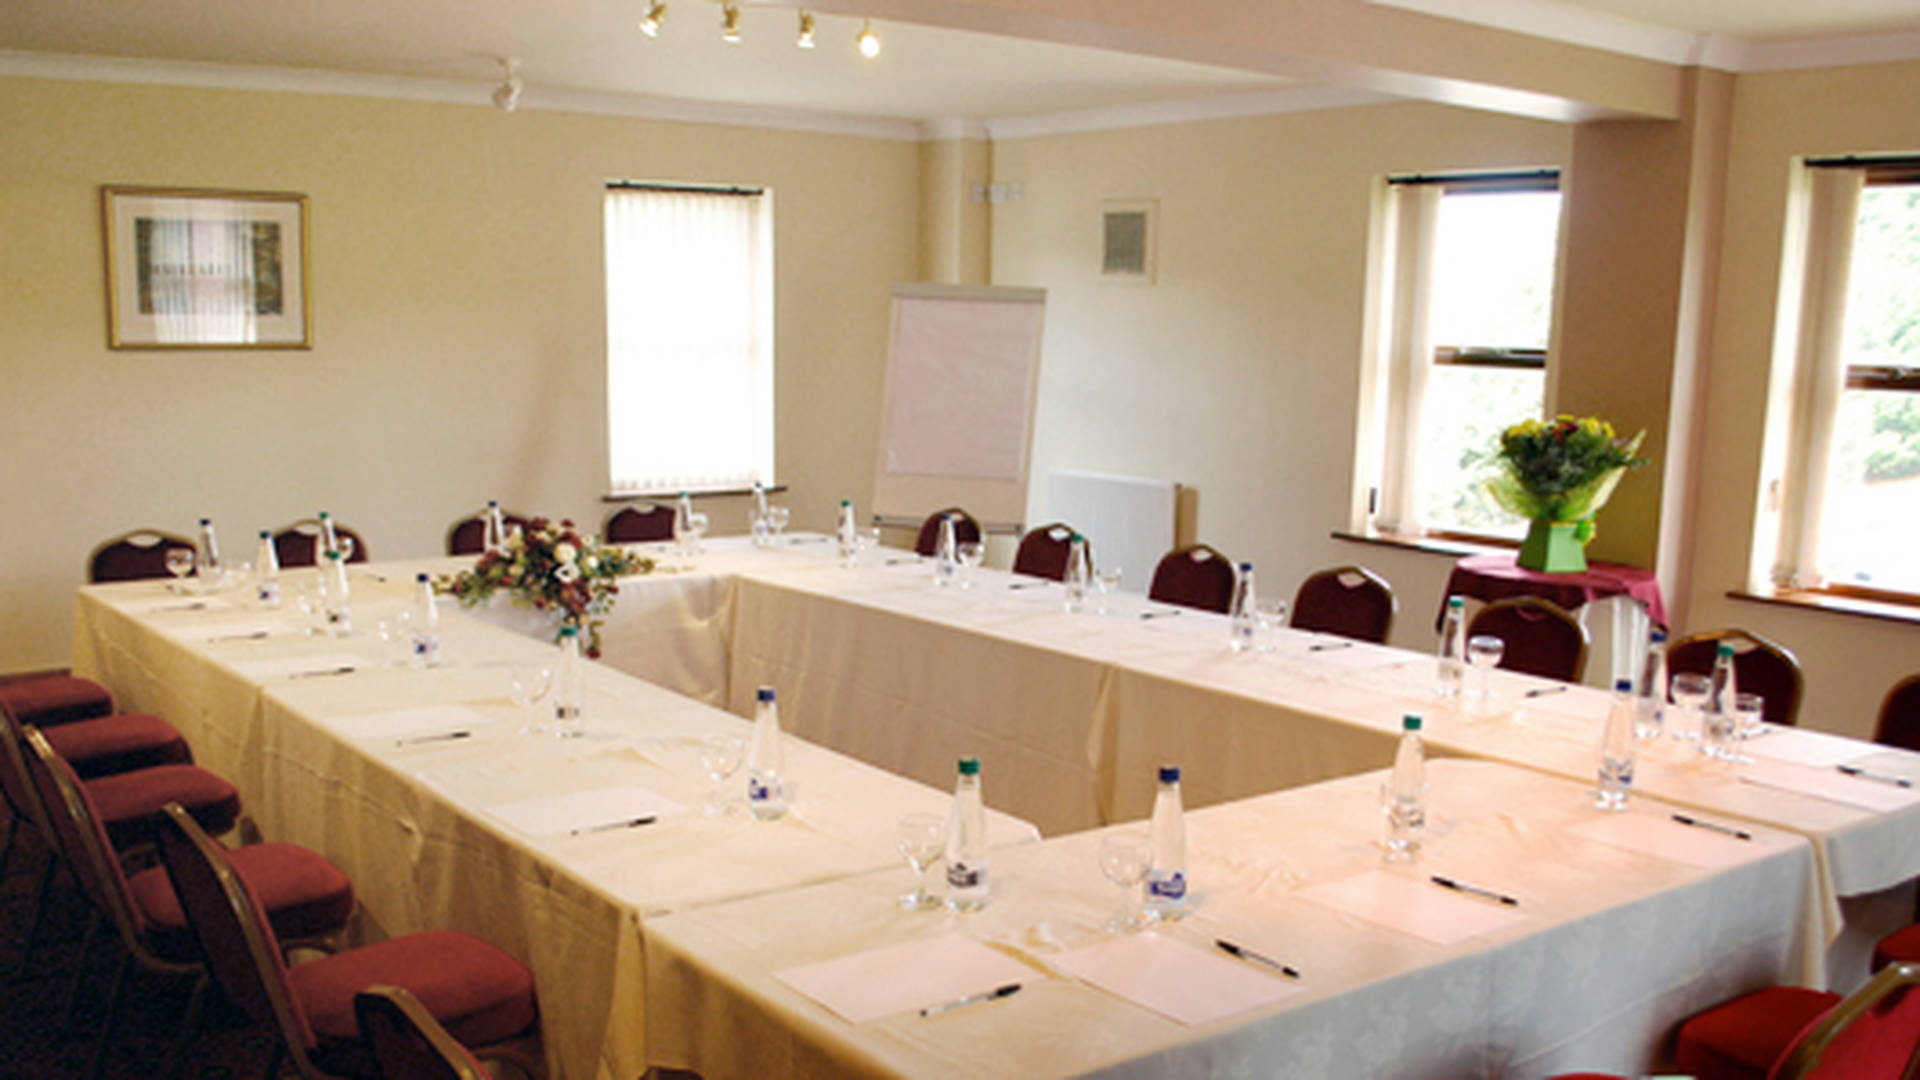 Meetings and Conferences at Wharton Park Image